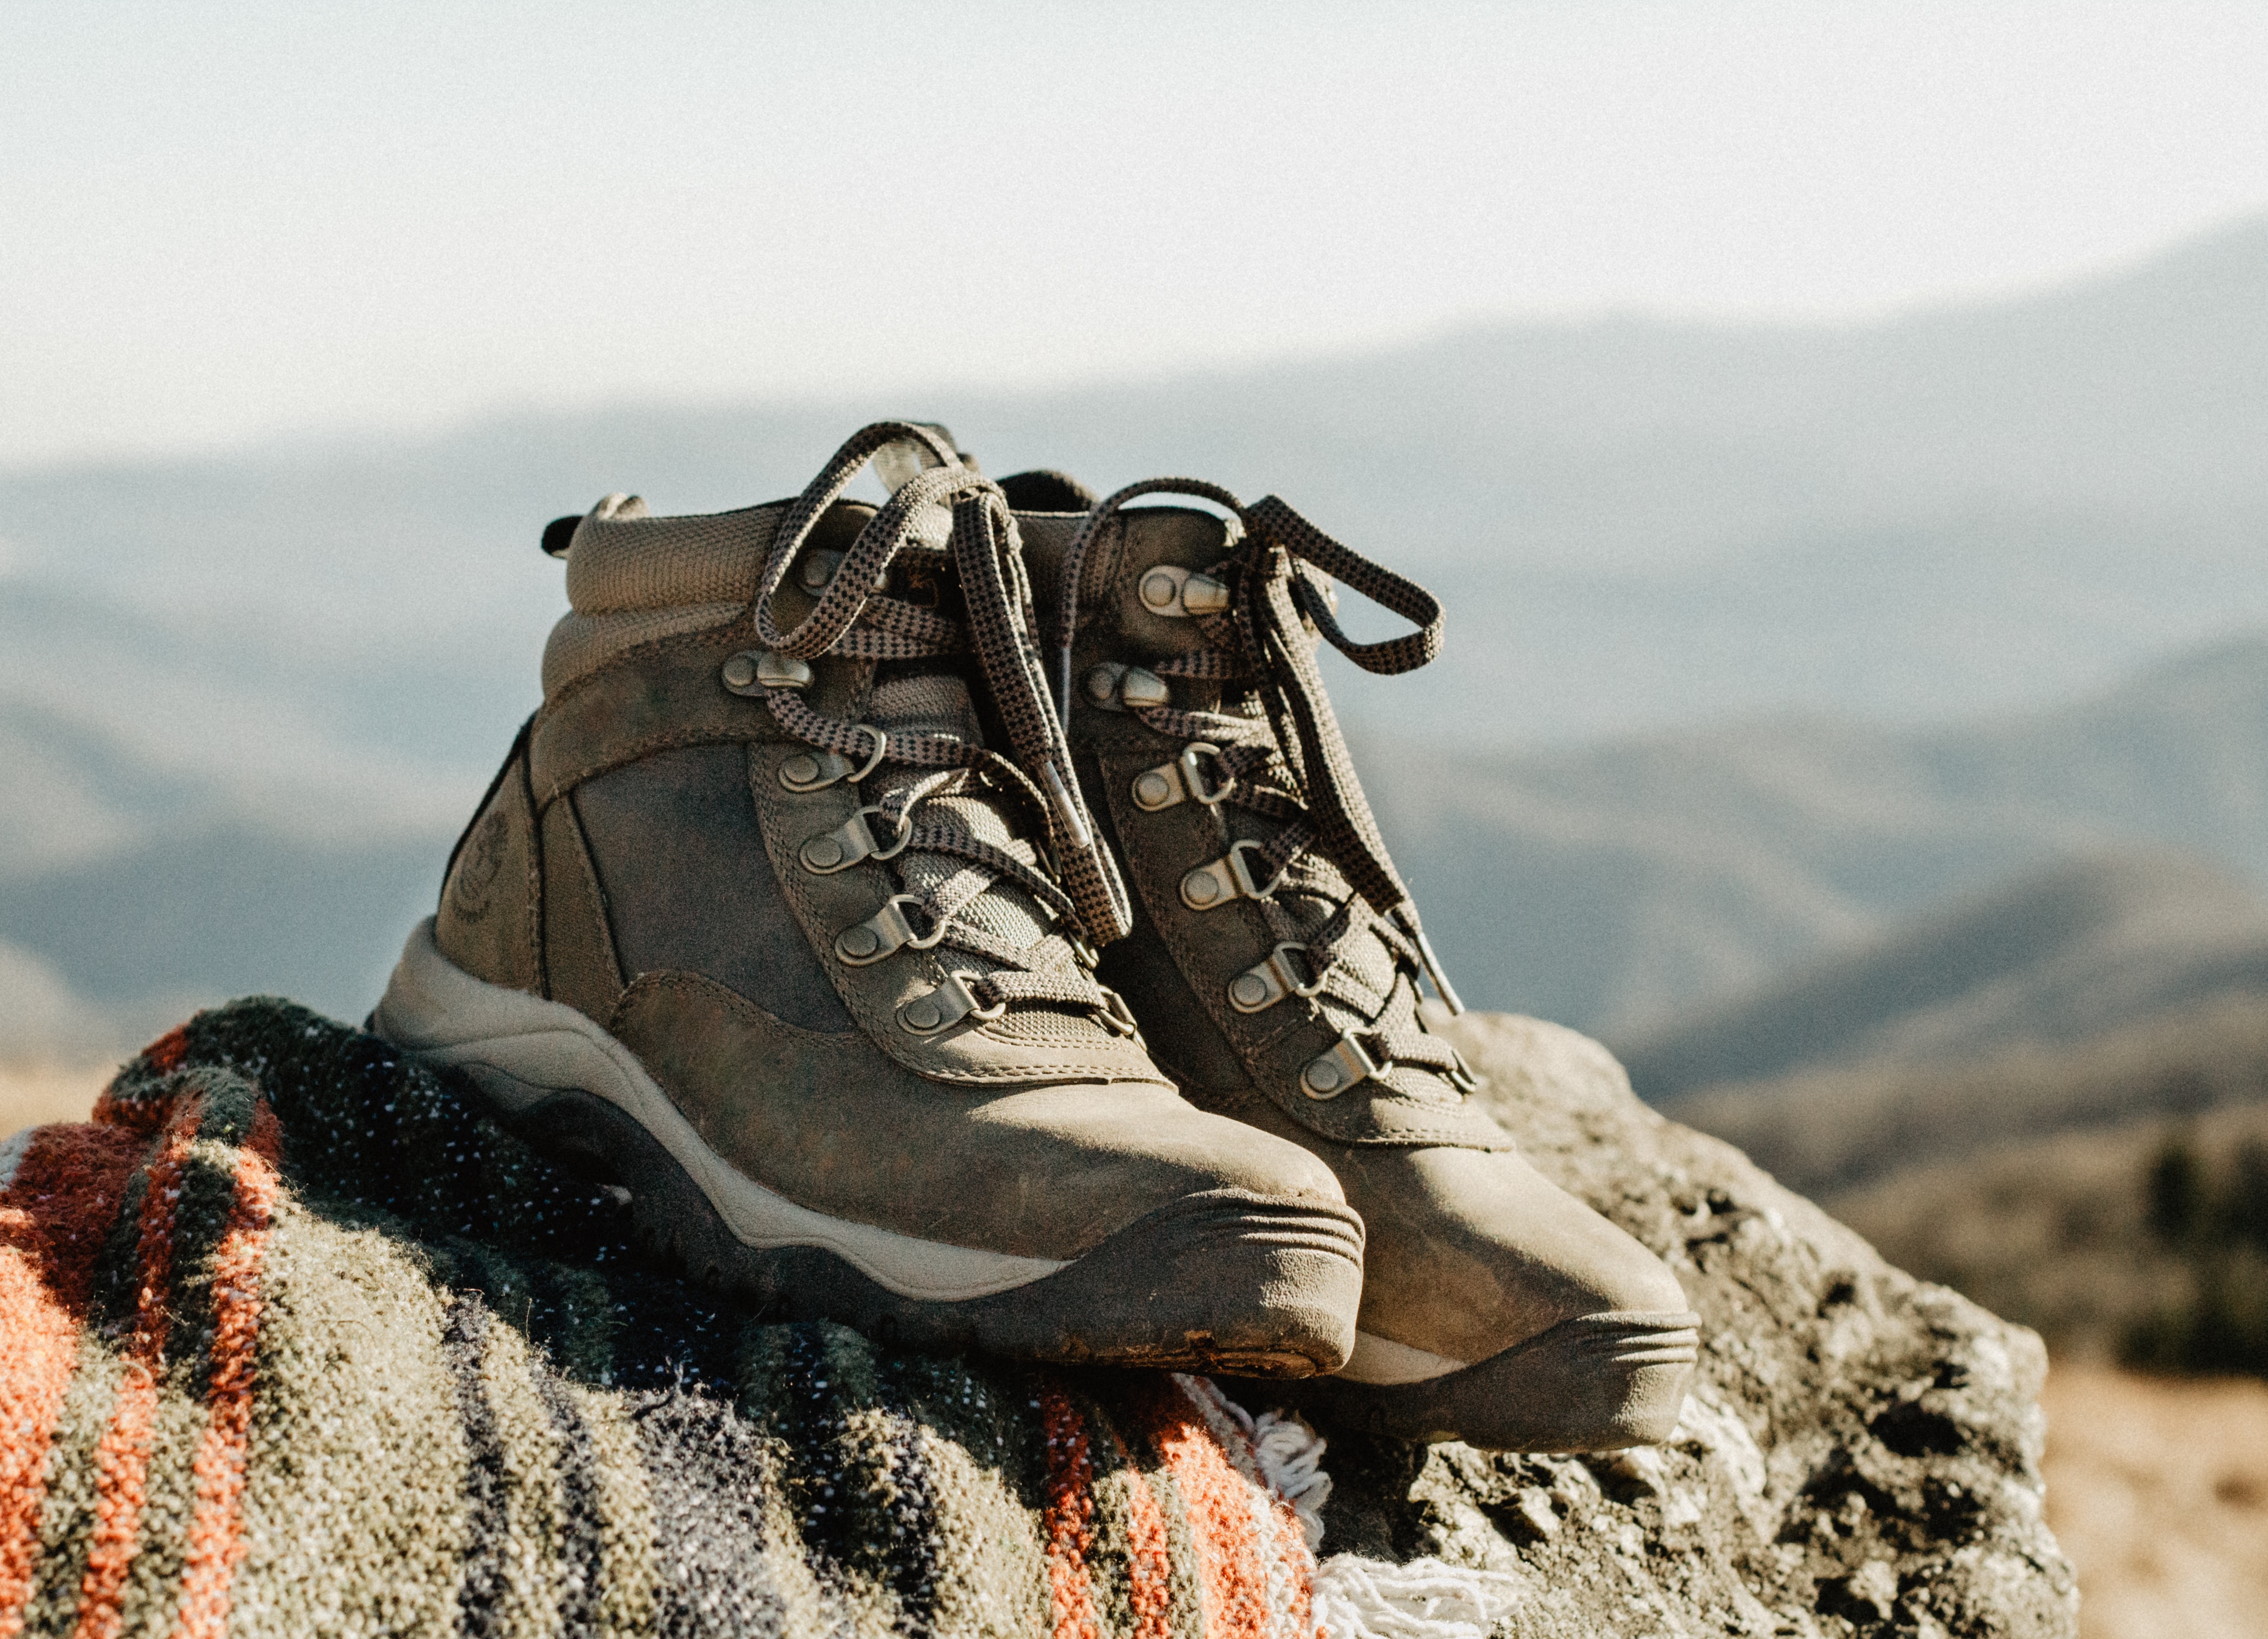 Looking for your next pair of hiking boots?